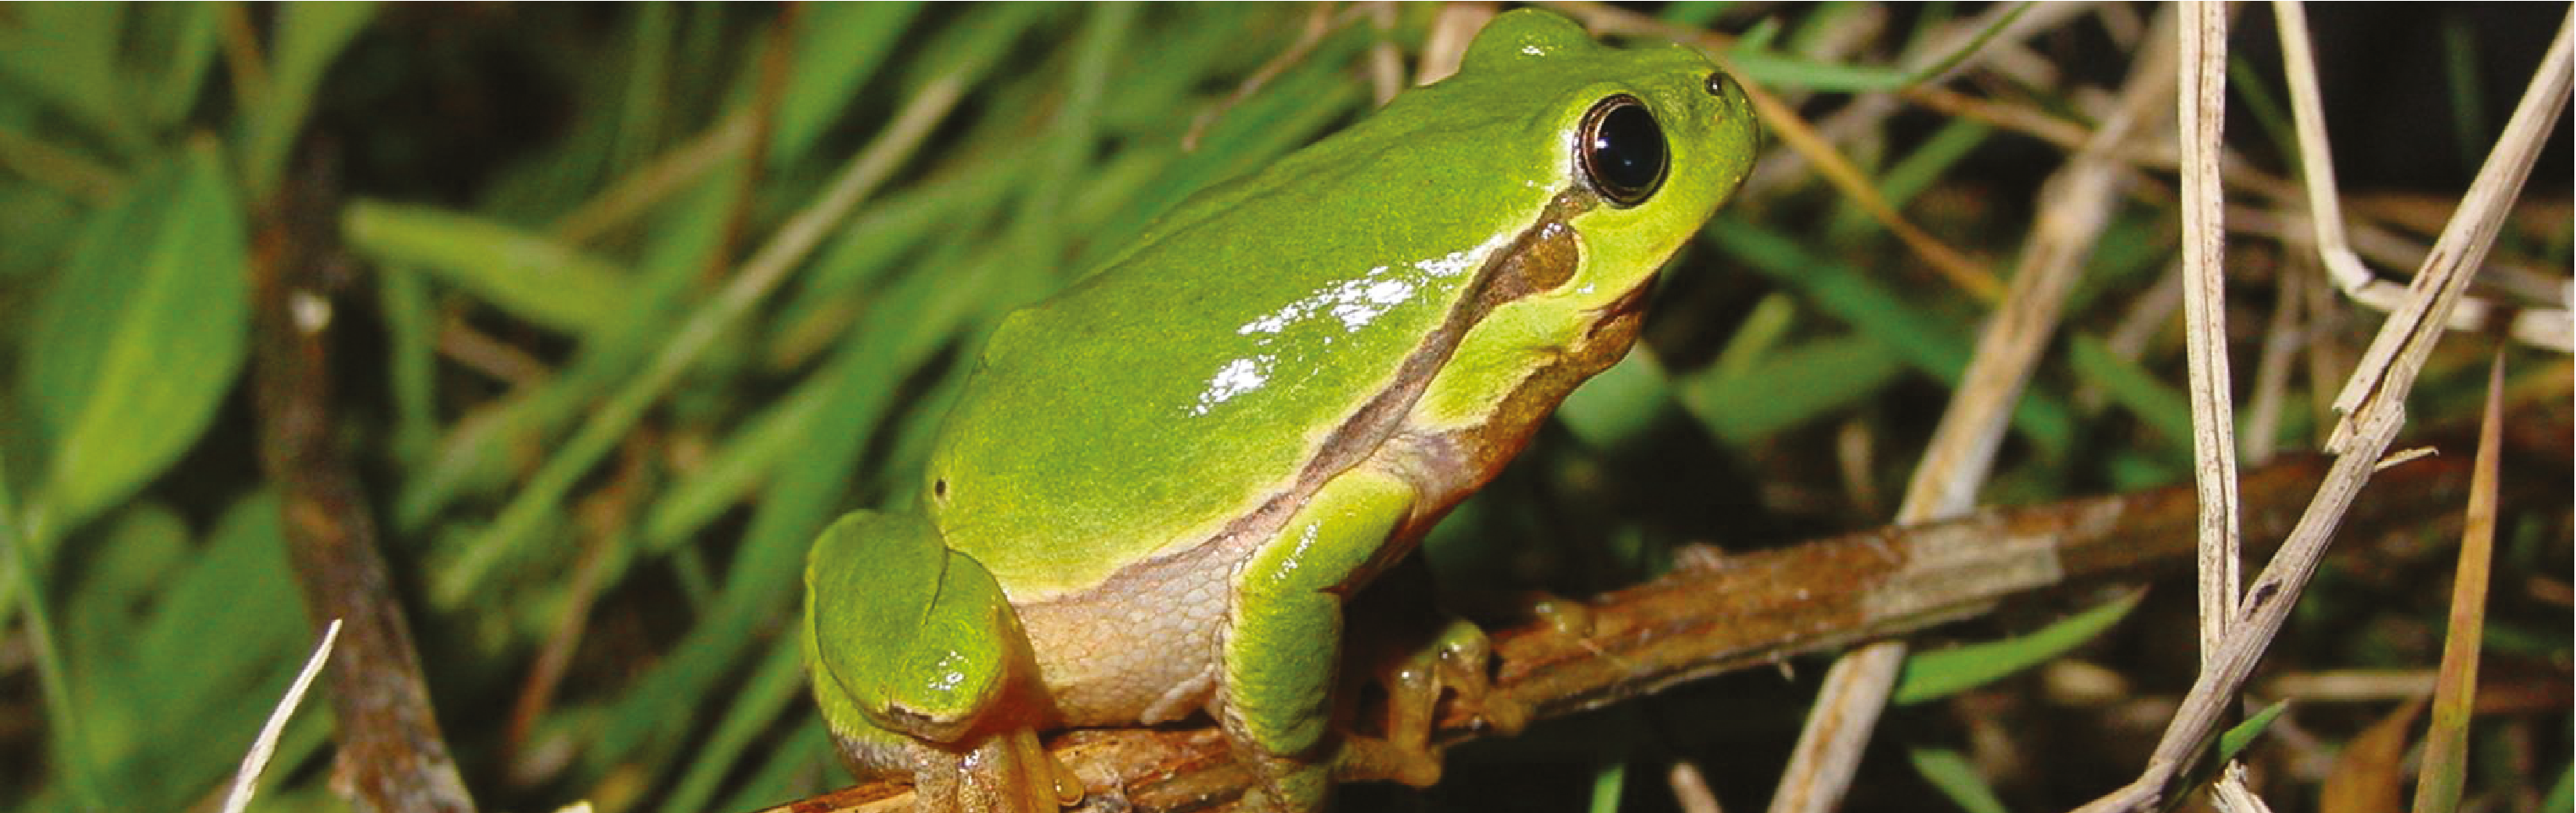 Grenouille_730x230.png